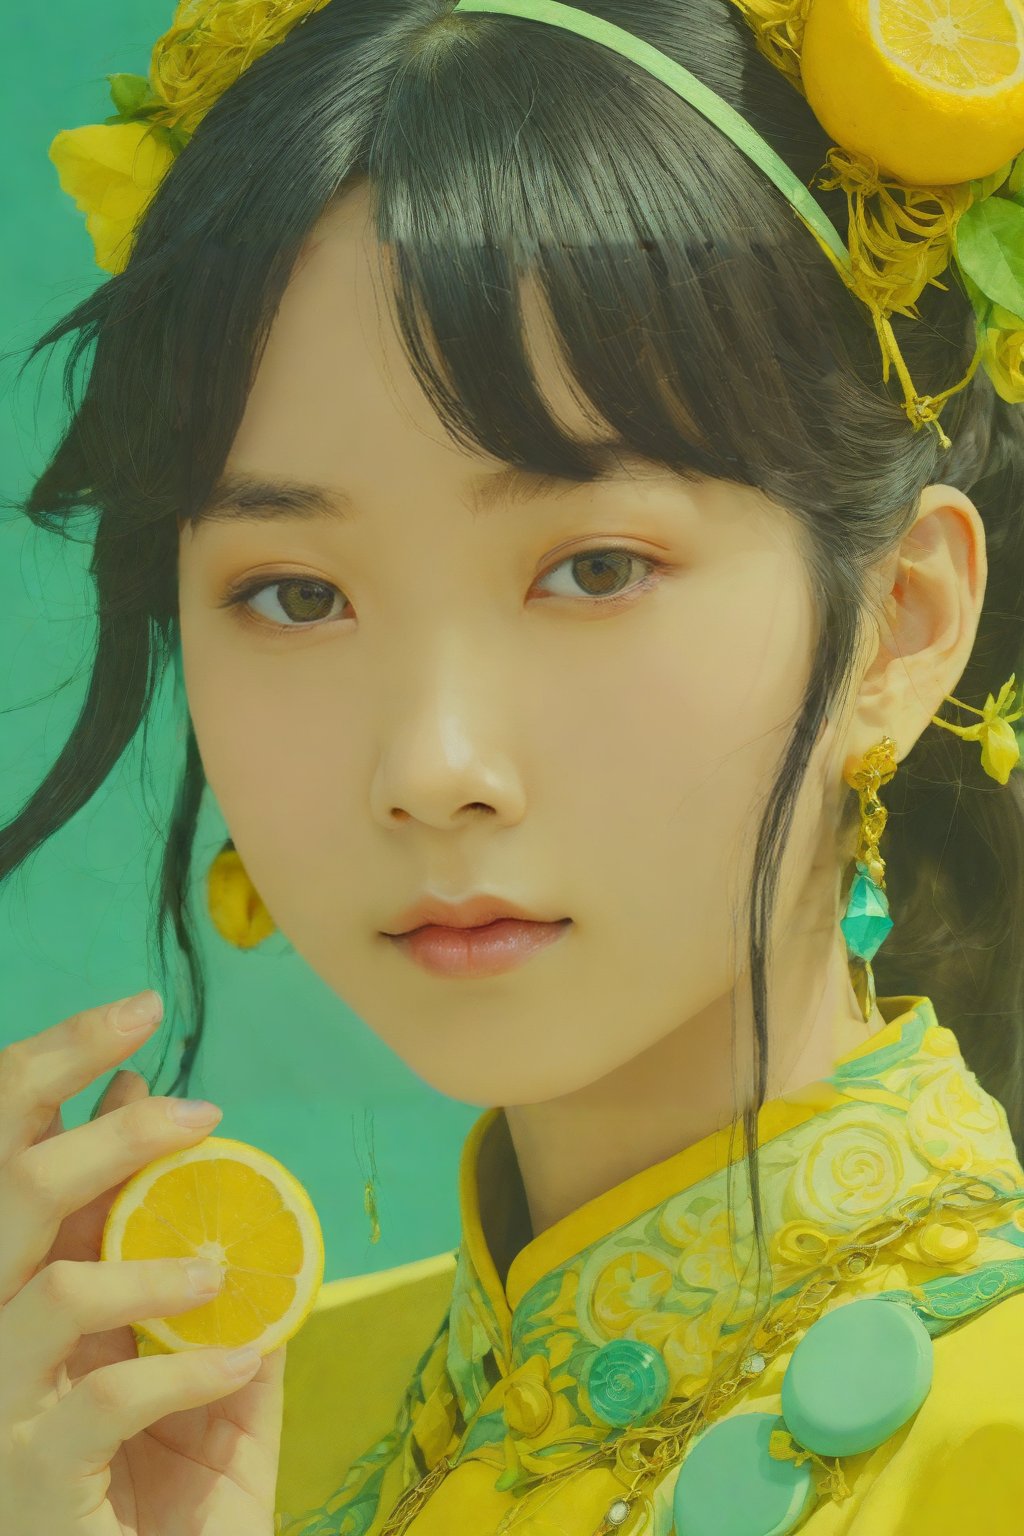 stylized by Masaaki Sasamoto, Doug Chiang, photograph, intricate details,close up of a Friendly Feminine Oriental (1girl:1.1) , Lemon Yellow, Sky Blue and Mint Green Buttons, Smoky Conditions, Anime screencap, Art Photography, Starlight, Slow Shutter Speed, Sony A7, 80mm, realistic flawless face